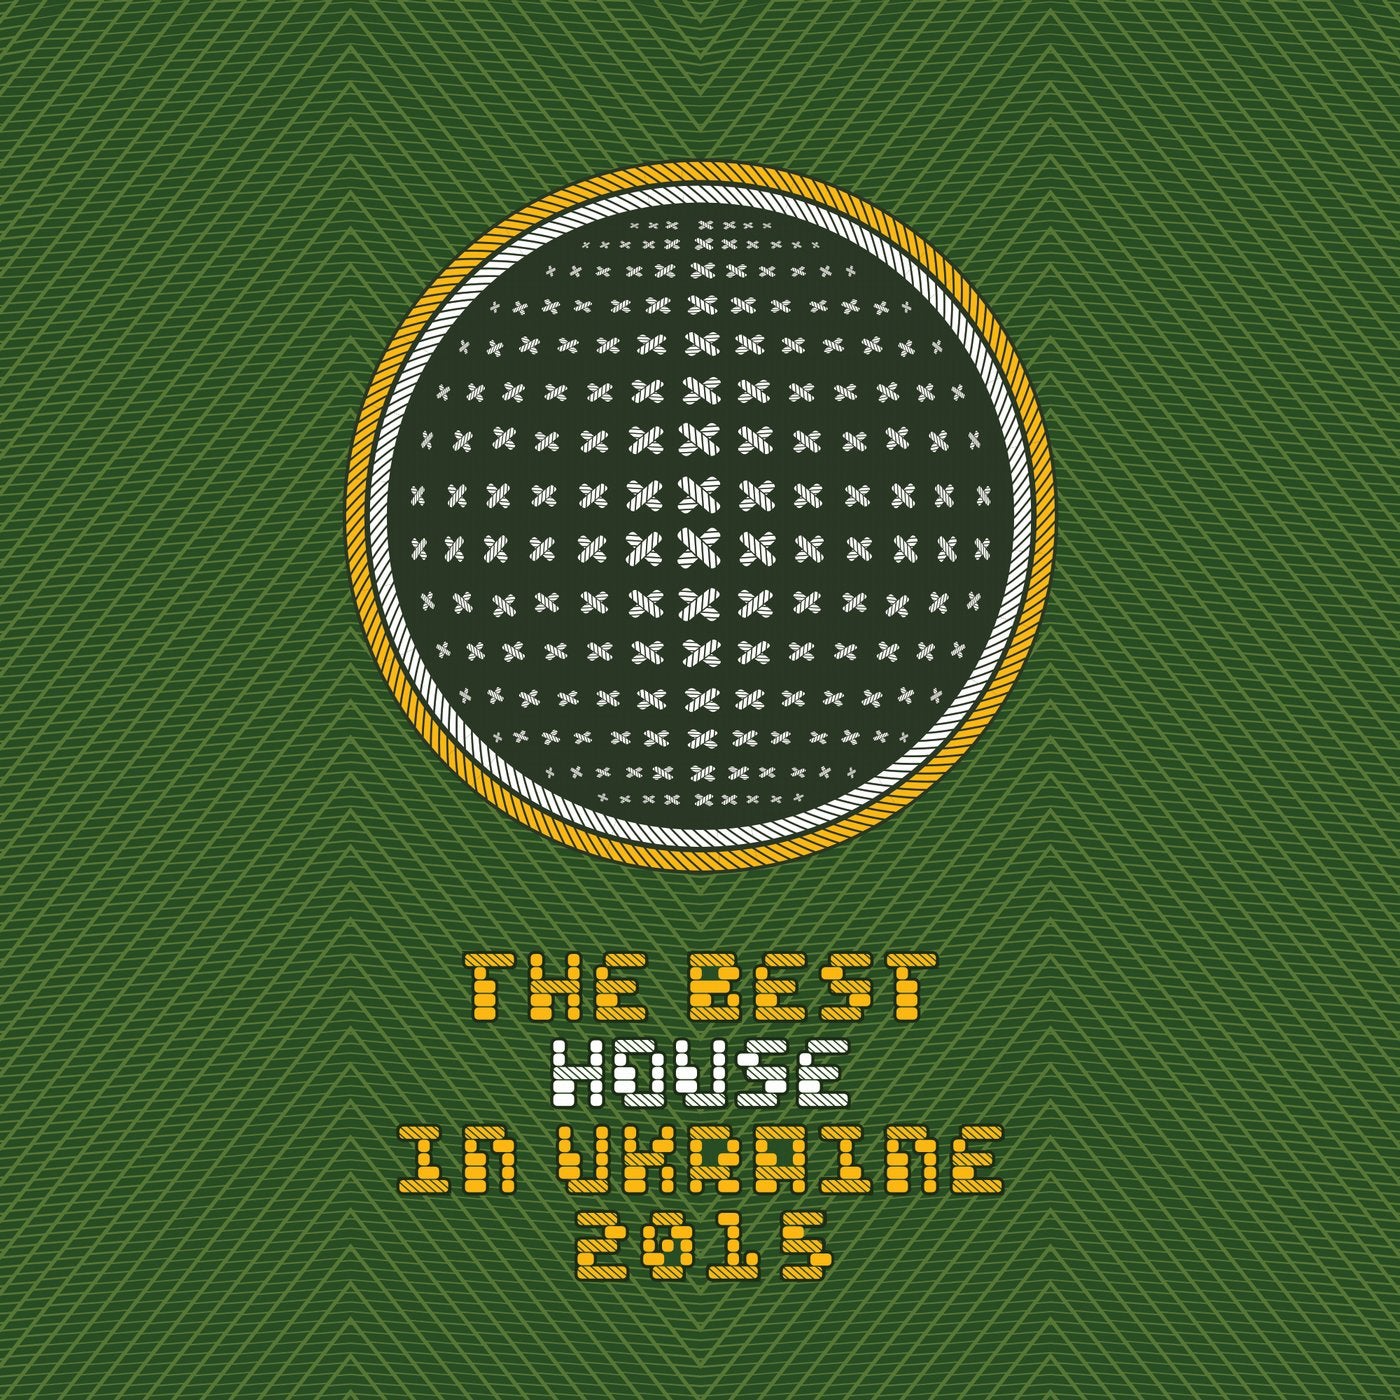 THE BEST HOUSE IN UA (VOL.6)